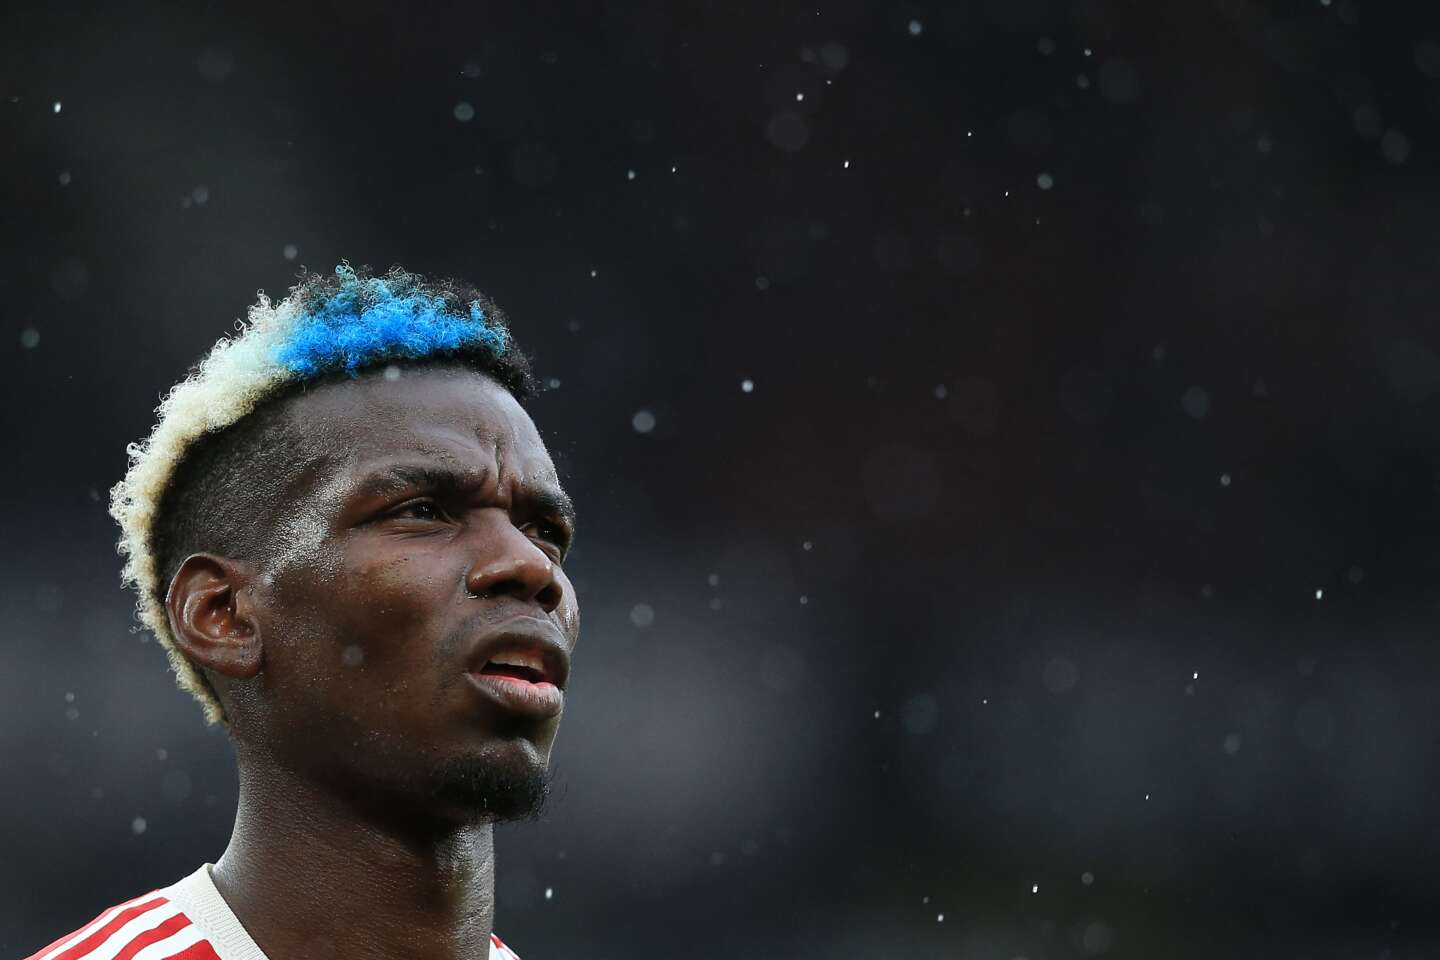 Paul Pogba provisionally suspended for doping, risks 4-year ban